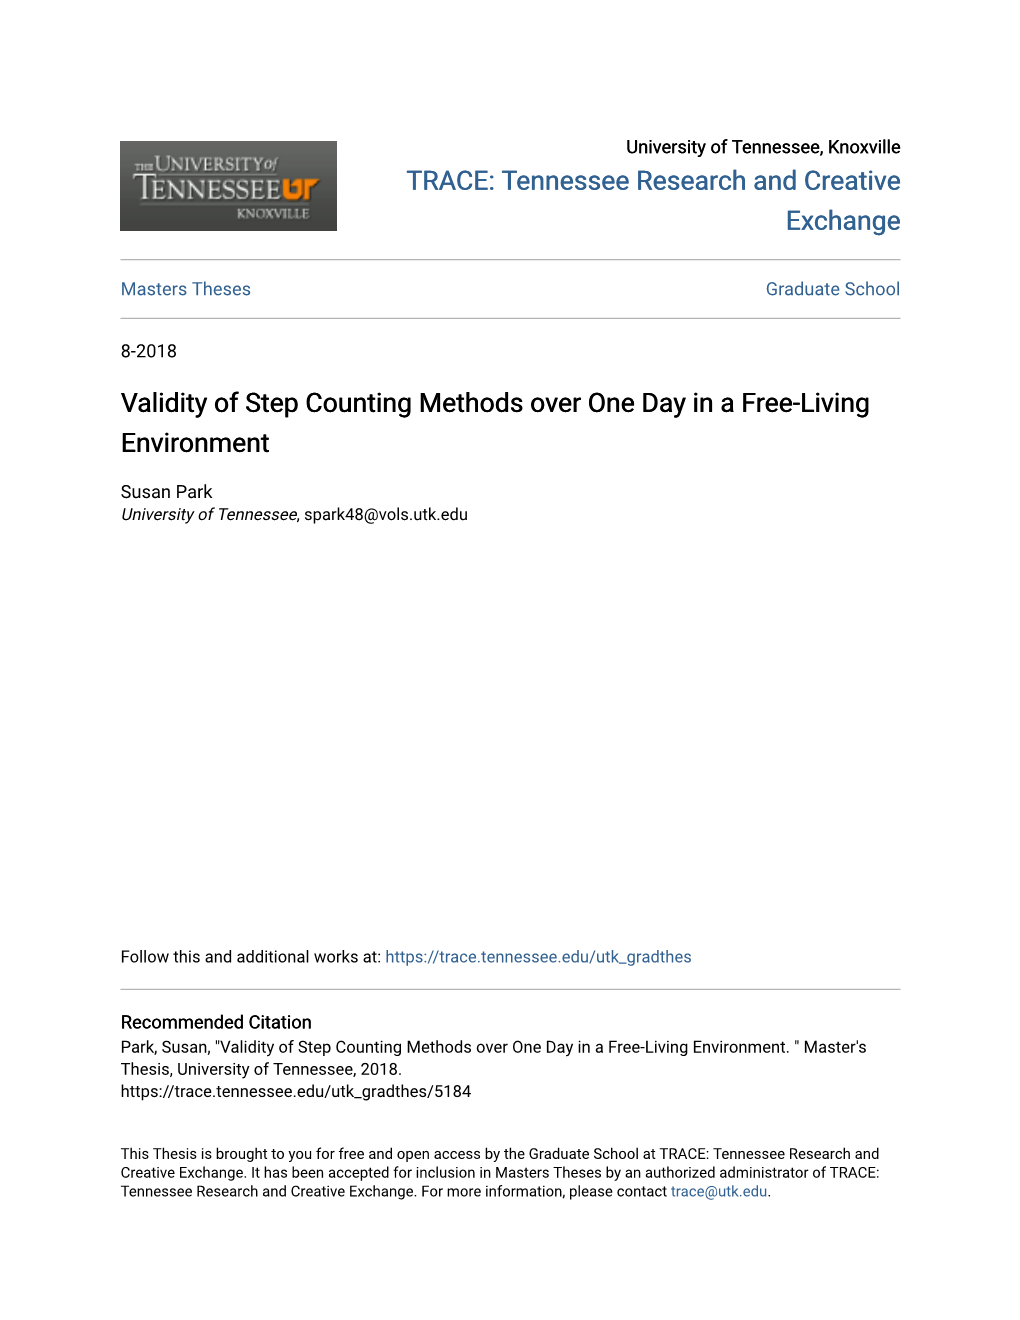 Validity of Step Counting Methods Over One Day in a Free-Living Environment